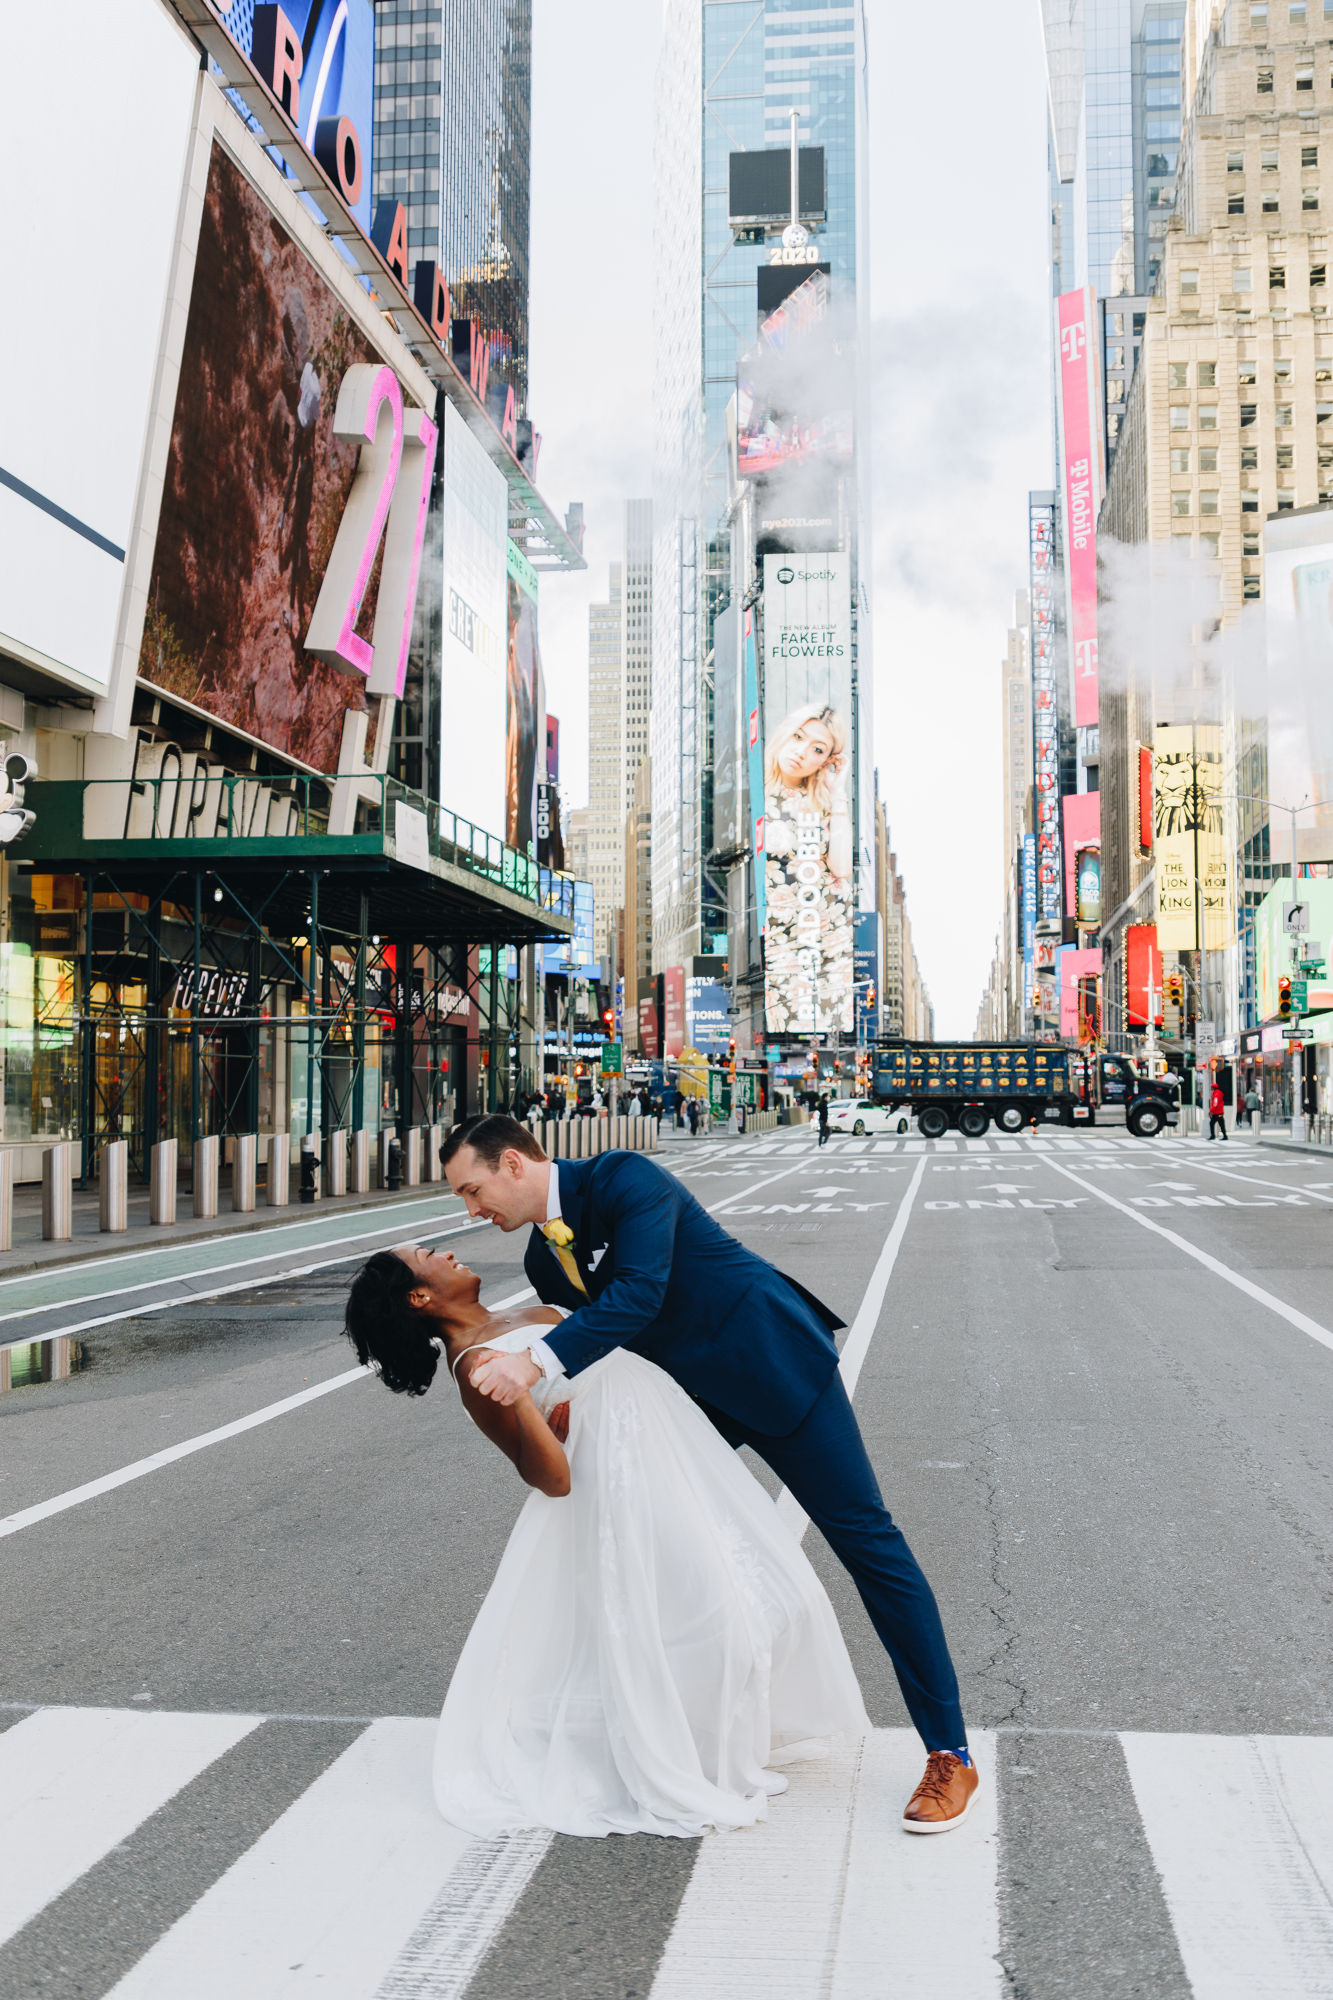 Stunning Times Square Wedding Photos in NYC